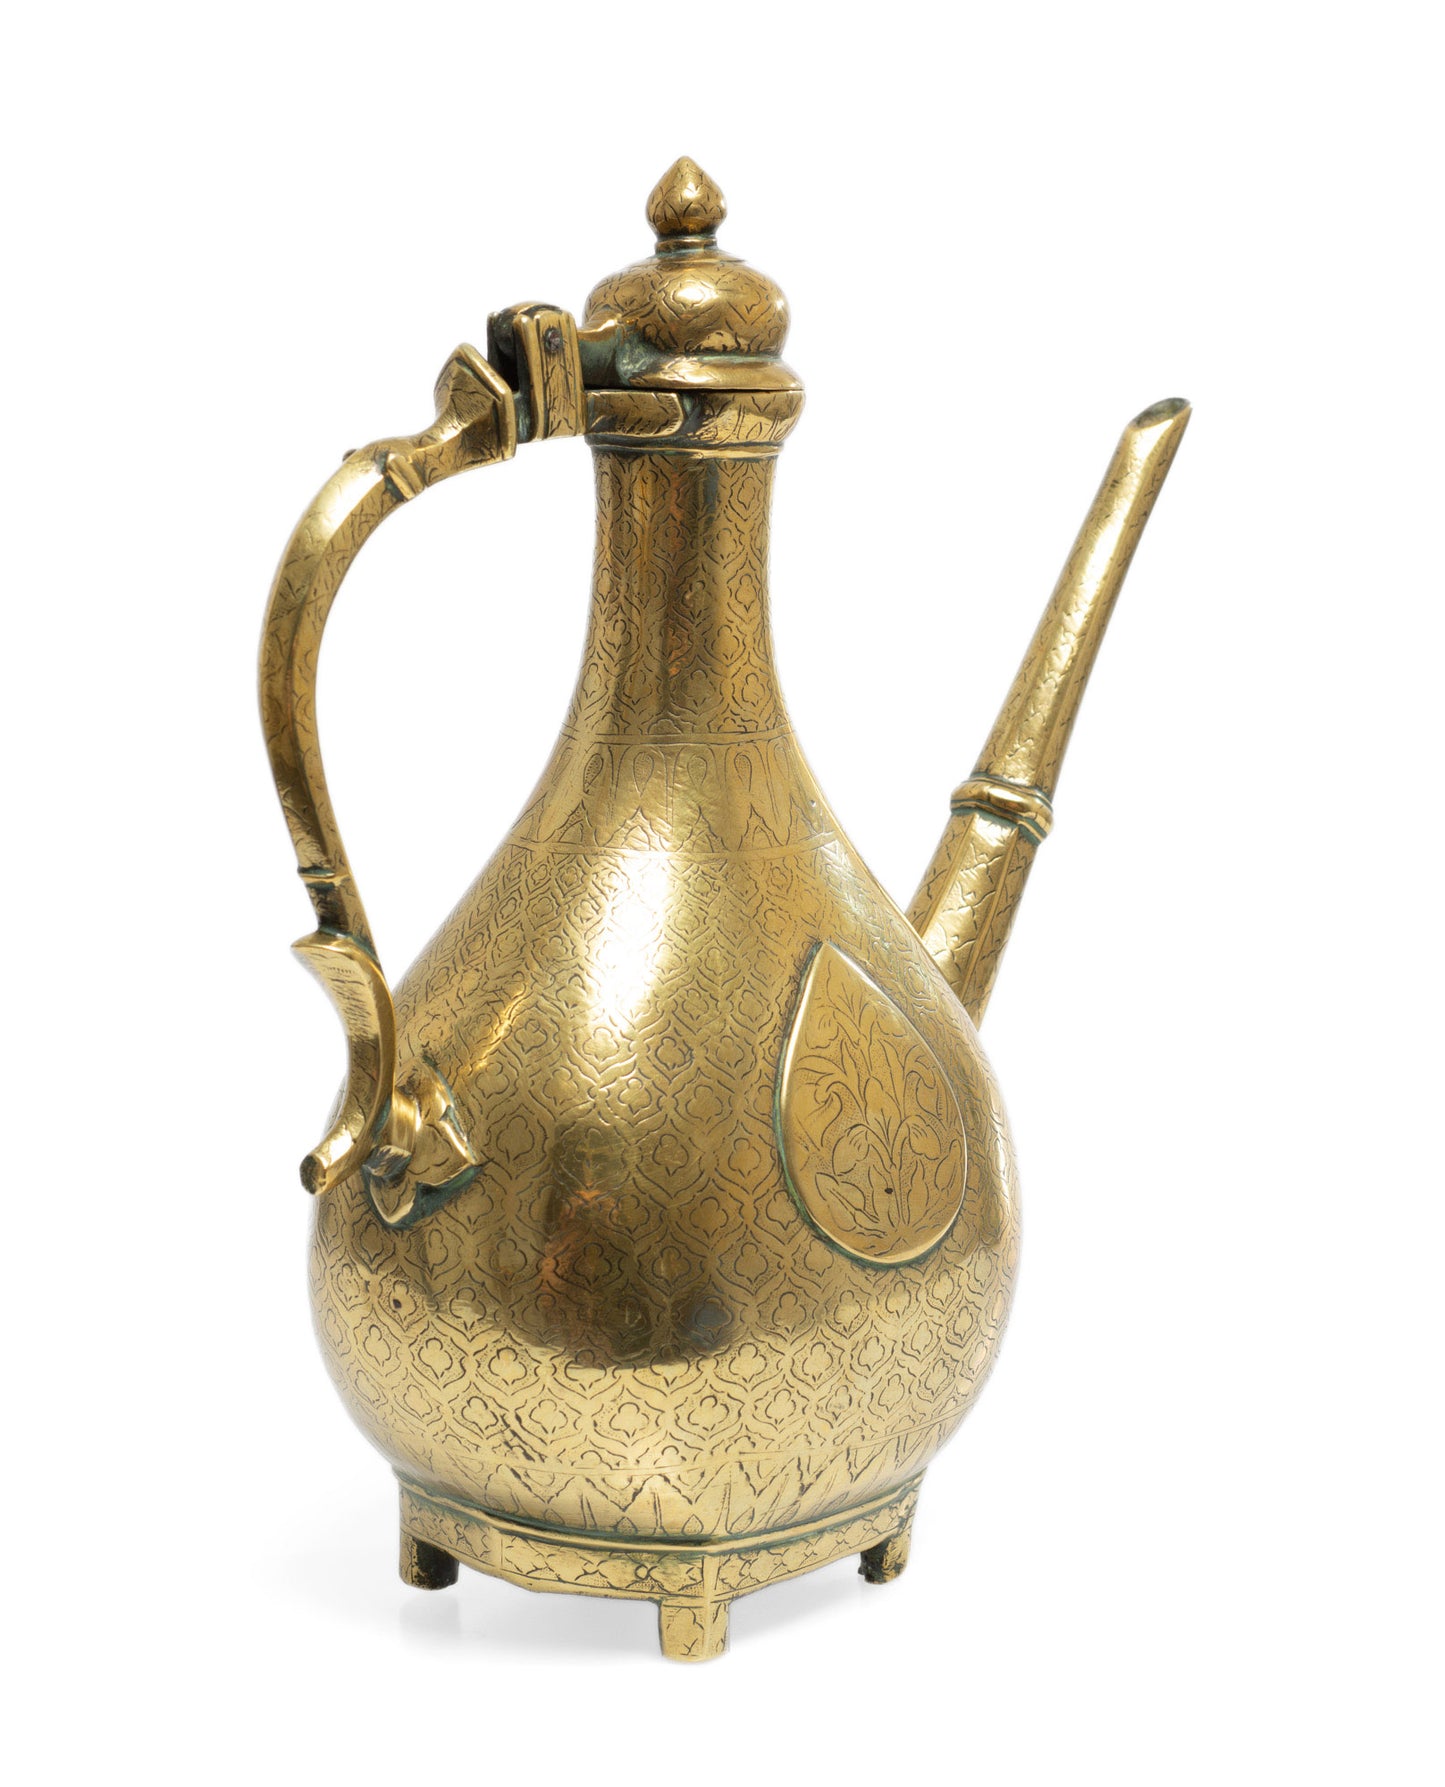 Antique Mughal Indian Islamic Brass Aftaba Ewer Chased Leaves - 18th Century (Code 2653)